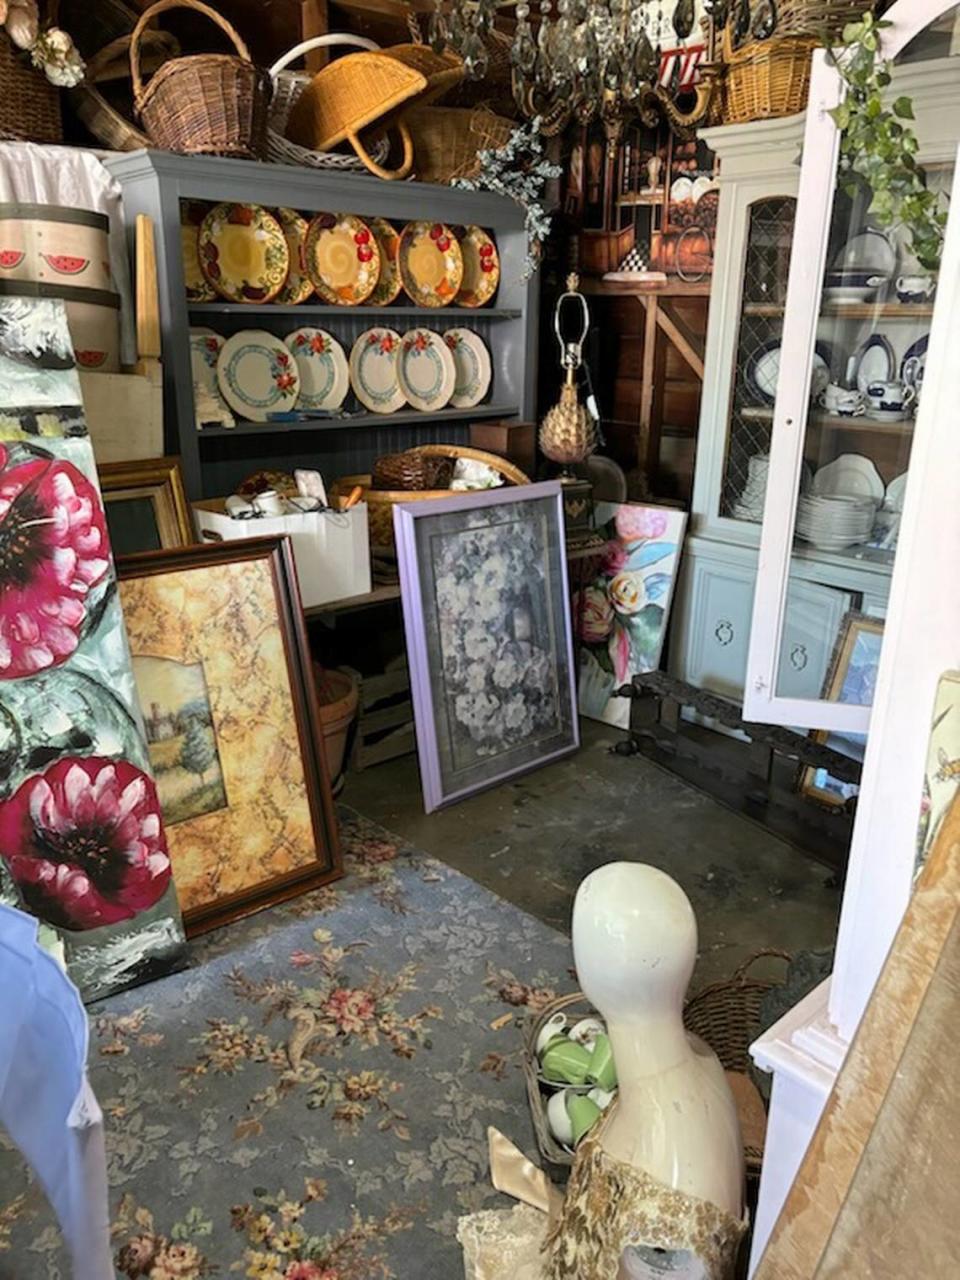 A recent garage sale in the La Loma area is an example of what Visit Modesto CEO Todd Aaronson hopes to see at the city’s first Modesto GarageFest on April 20.